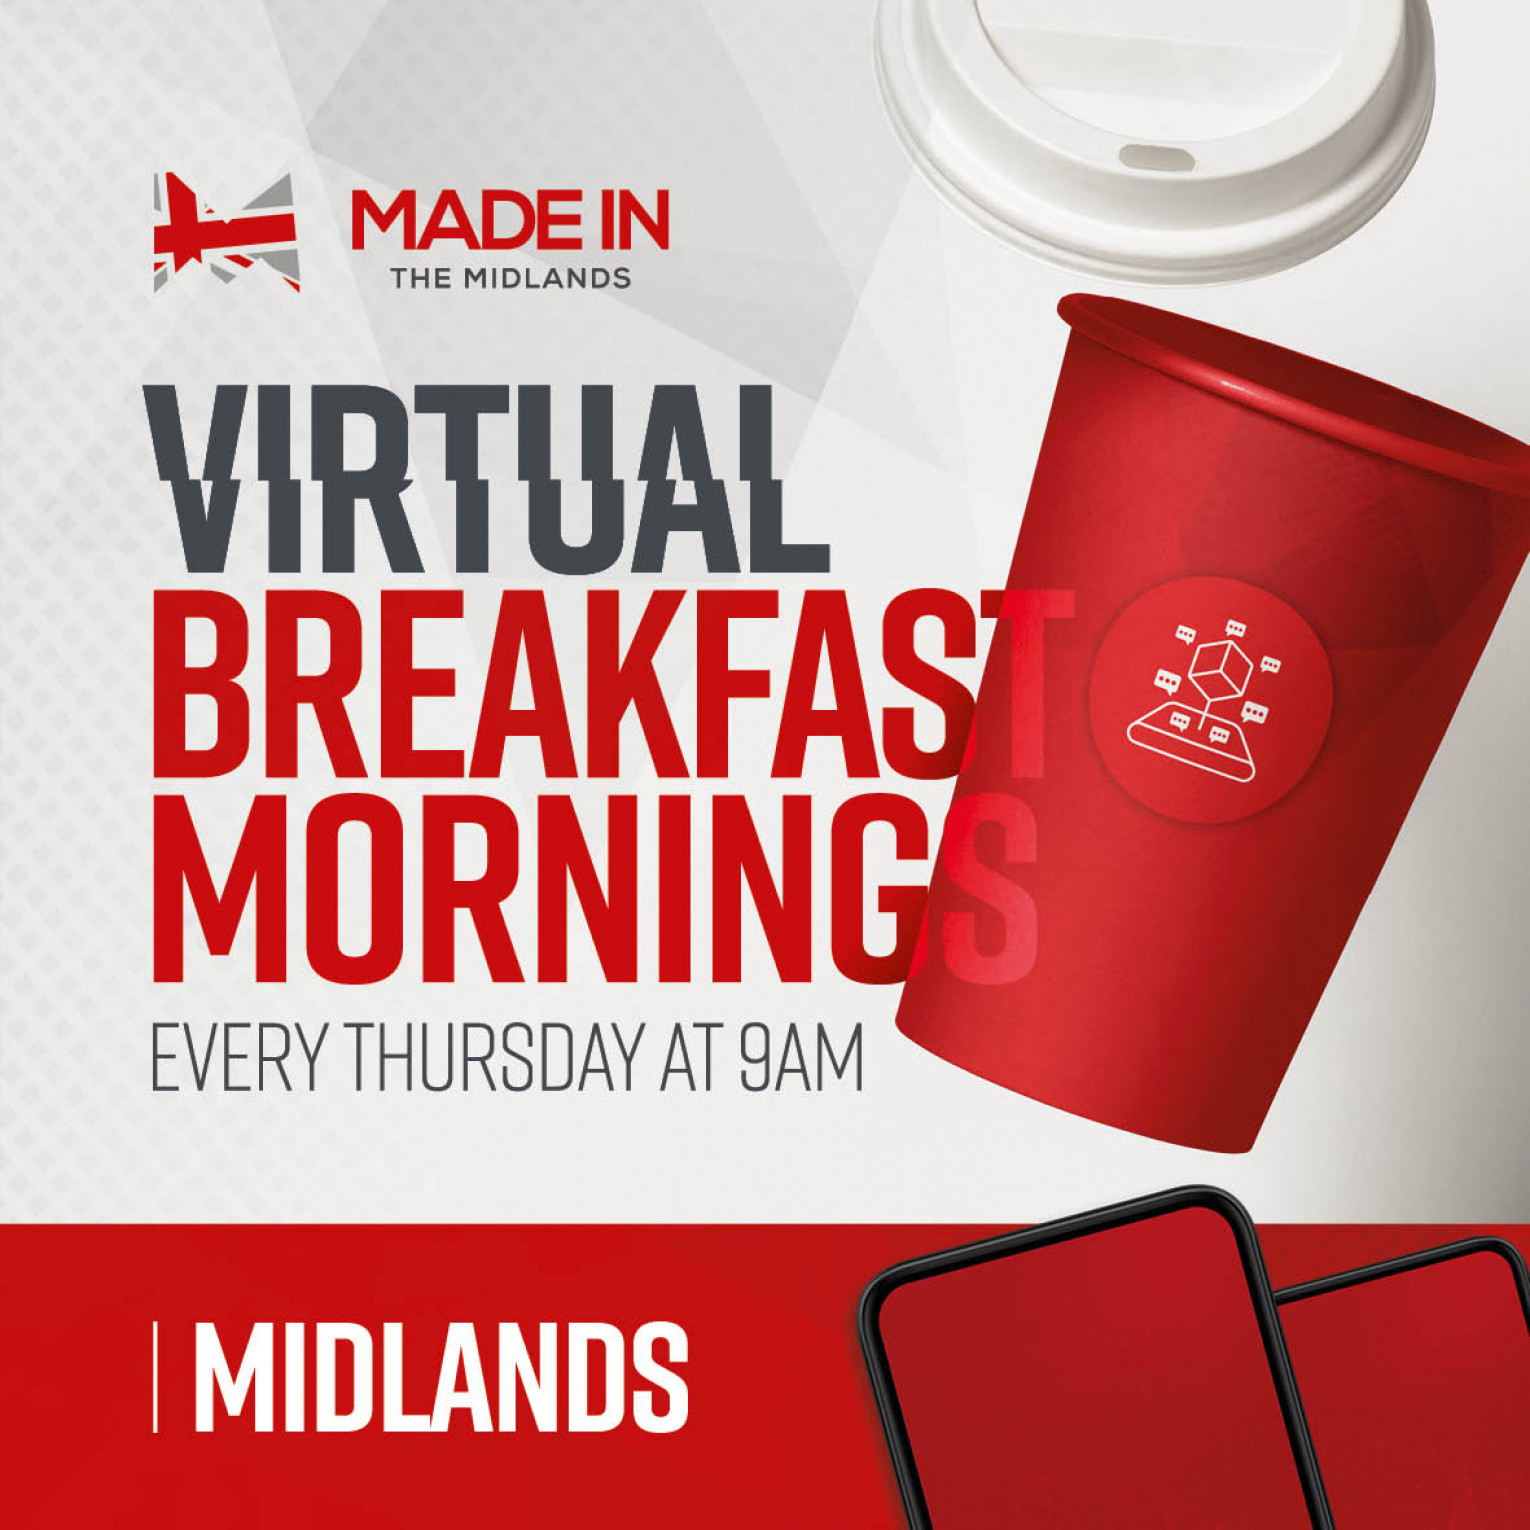 Made in the Midlands Virtual Breakfast Morning with Portakabin